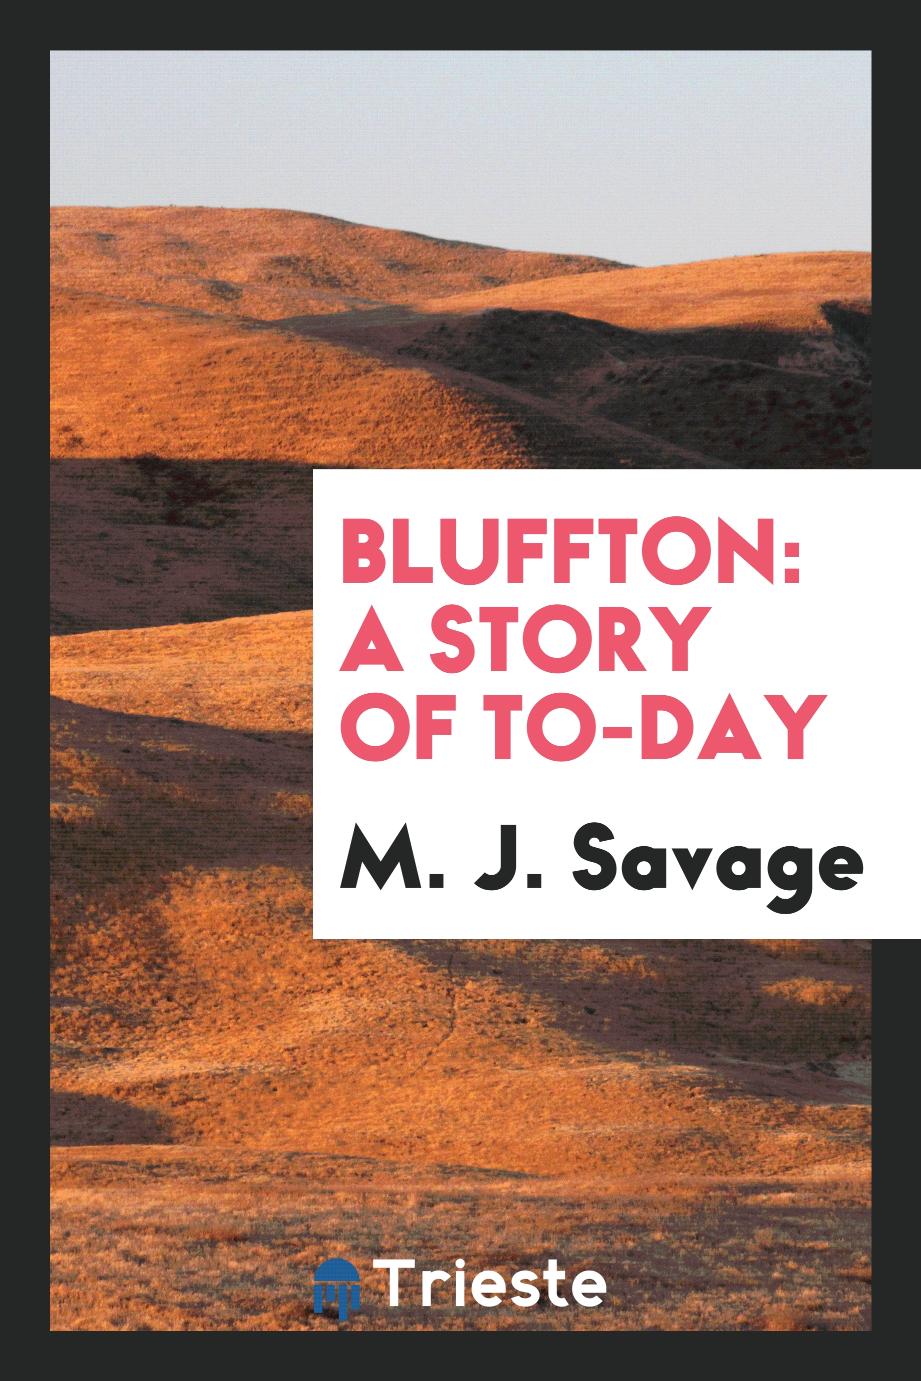 Bluffton: A Story of To-Day